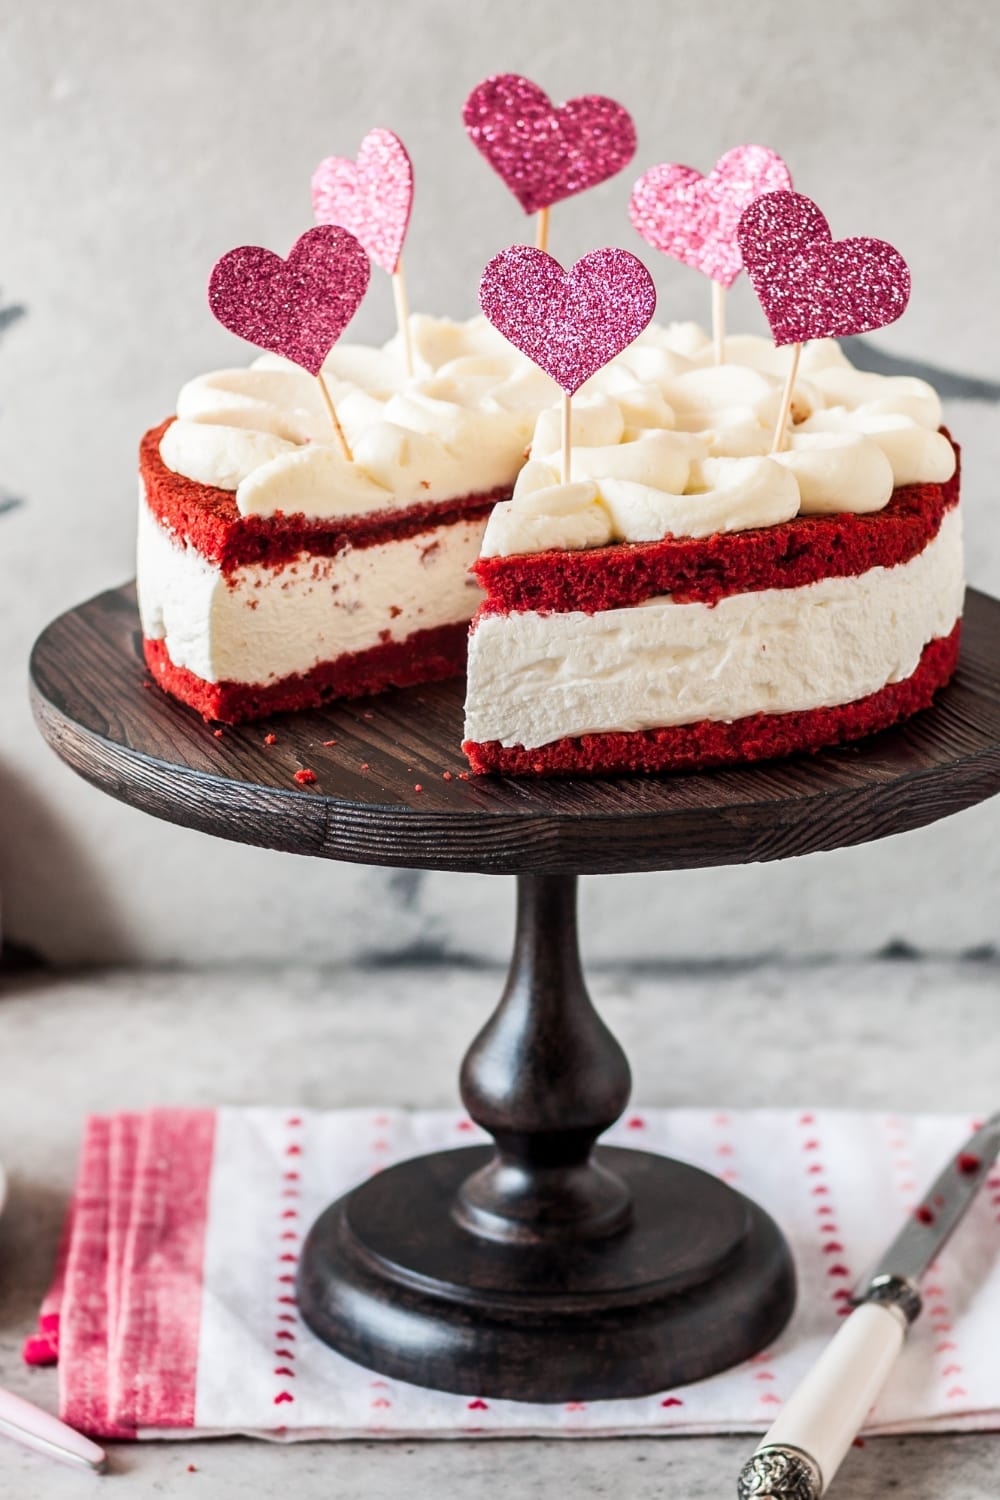 Valentine's Day Cheesecakes featuring Homemade Sliced Red Velvet Cheesecake Served on a Wooden Cake Tray